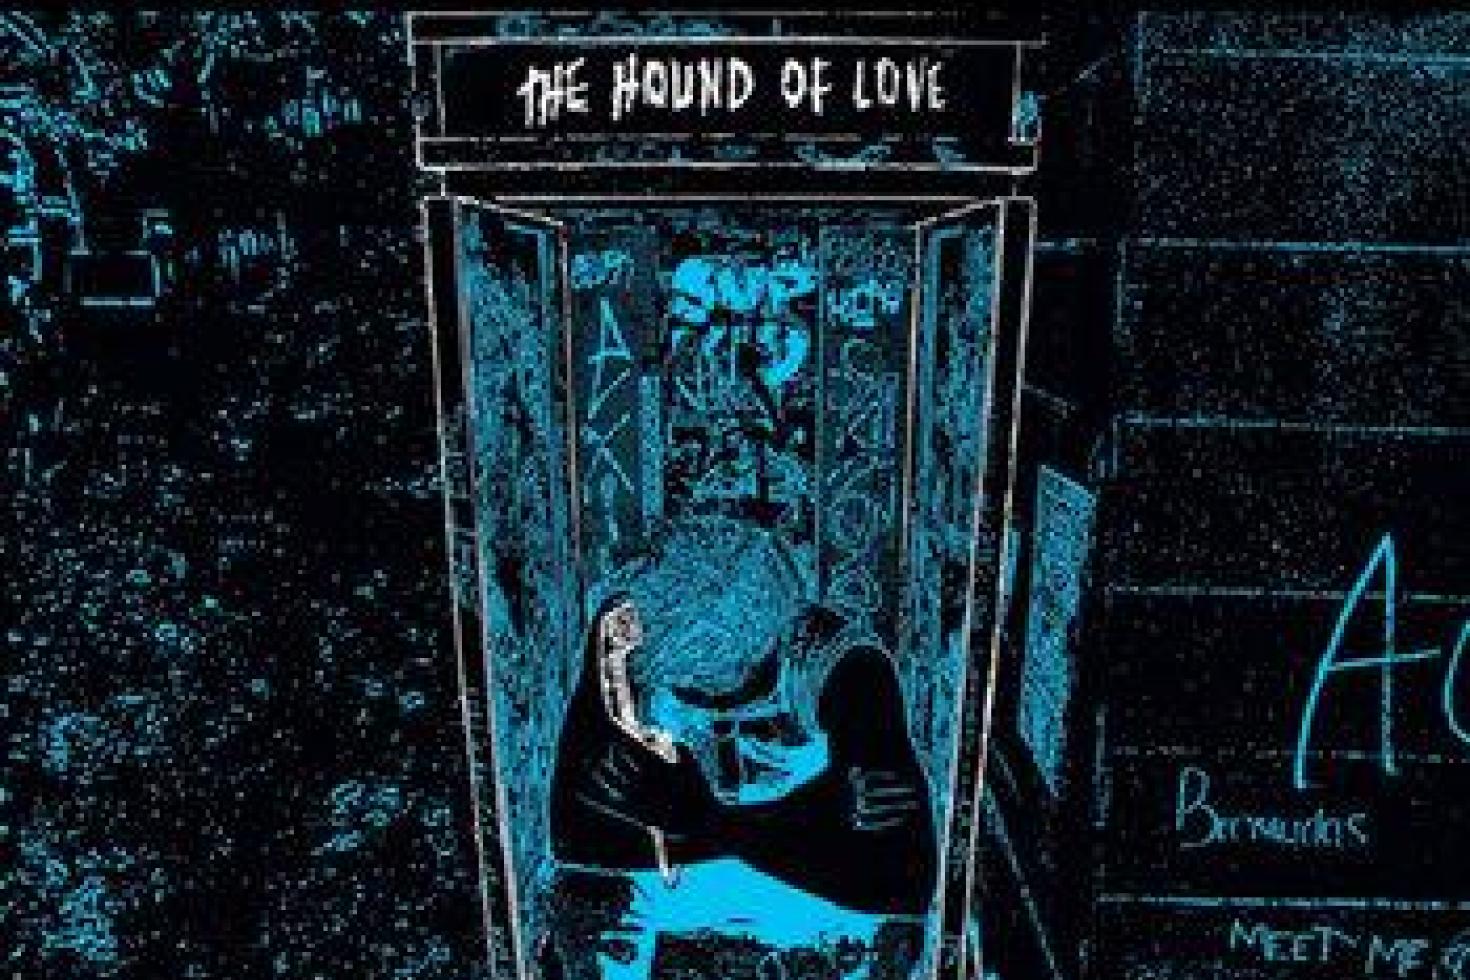 Mean Jeans' Andrew Bassett releases new 7" as The Hound Of Love